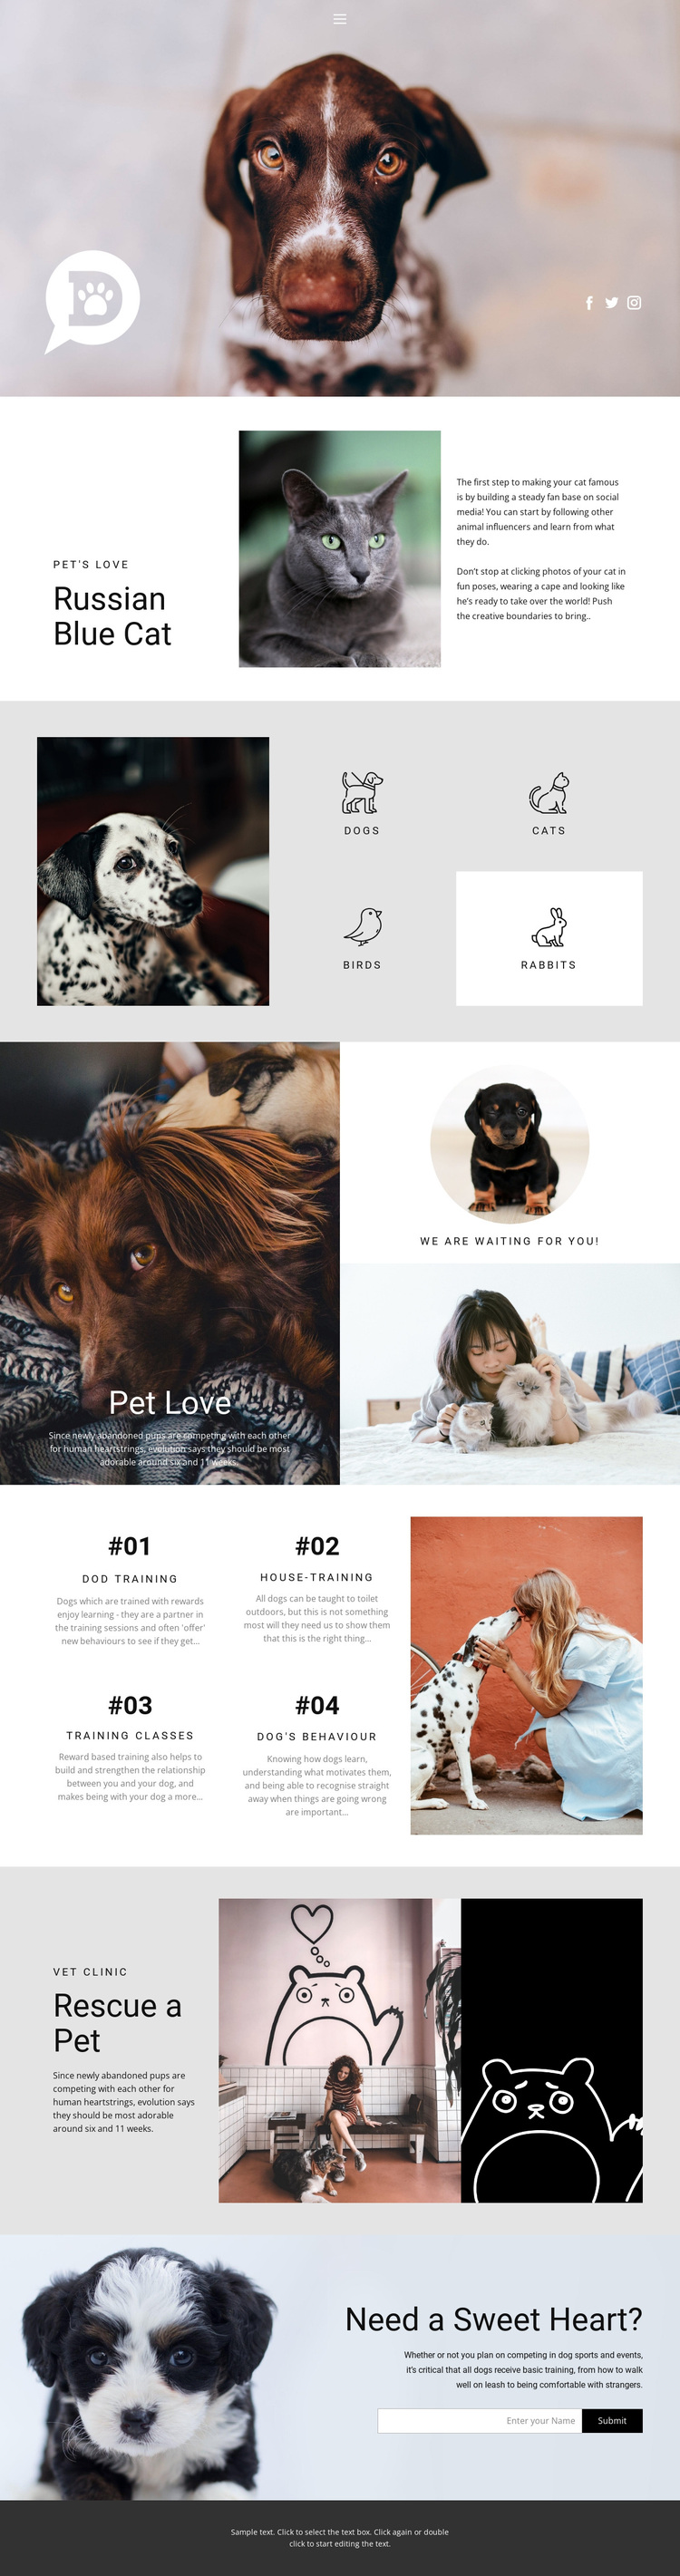 Care for pets and animals Joomla Page Builder